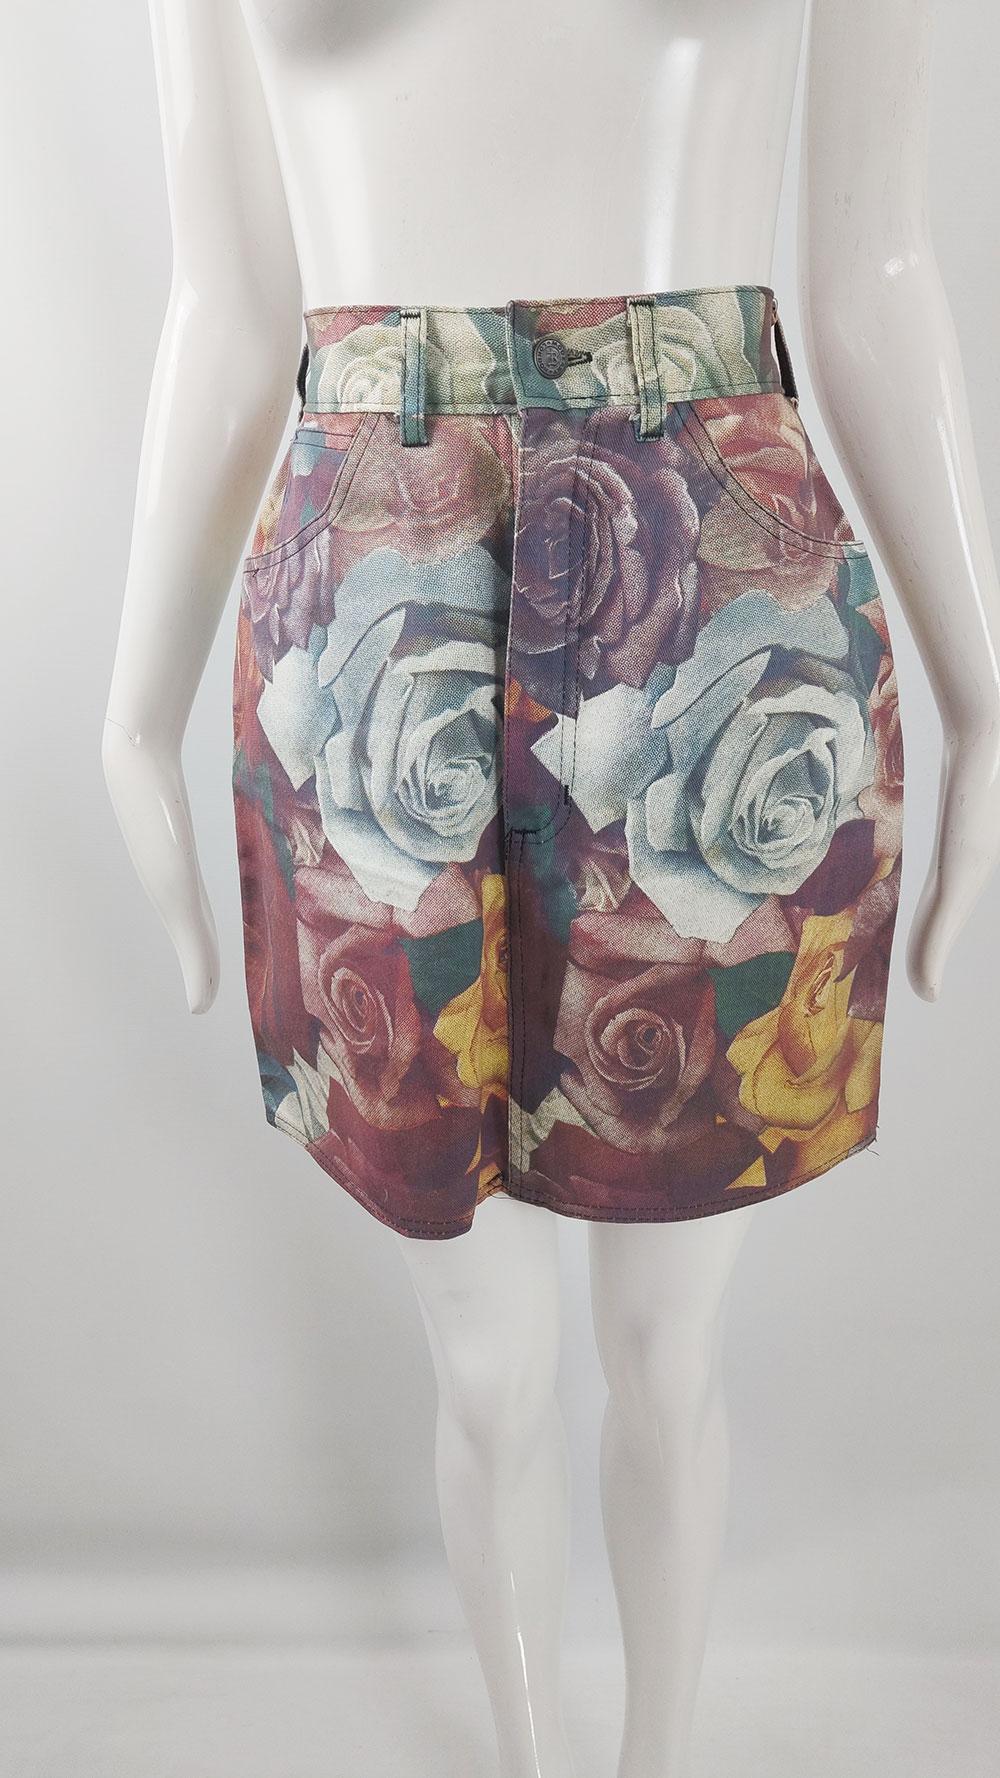 Modzart Vintage Floral Print Denim Mini Jeans Skirt, 1980s In Good Condition For Sale In Doncaster, South Yorkshire